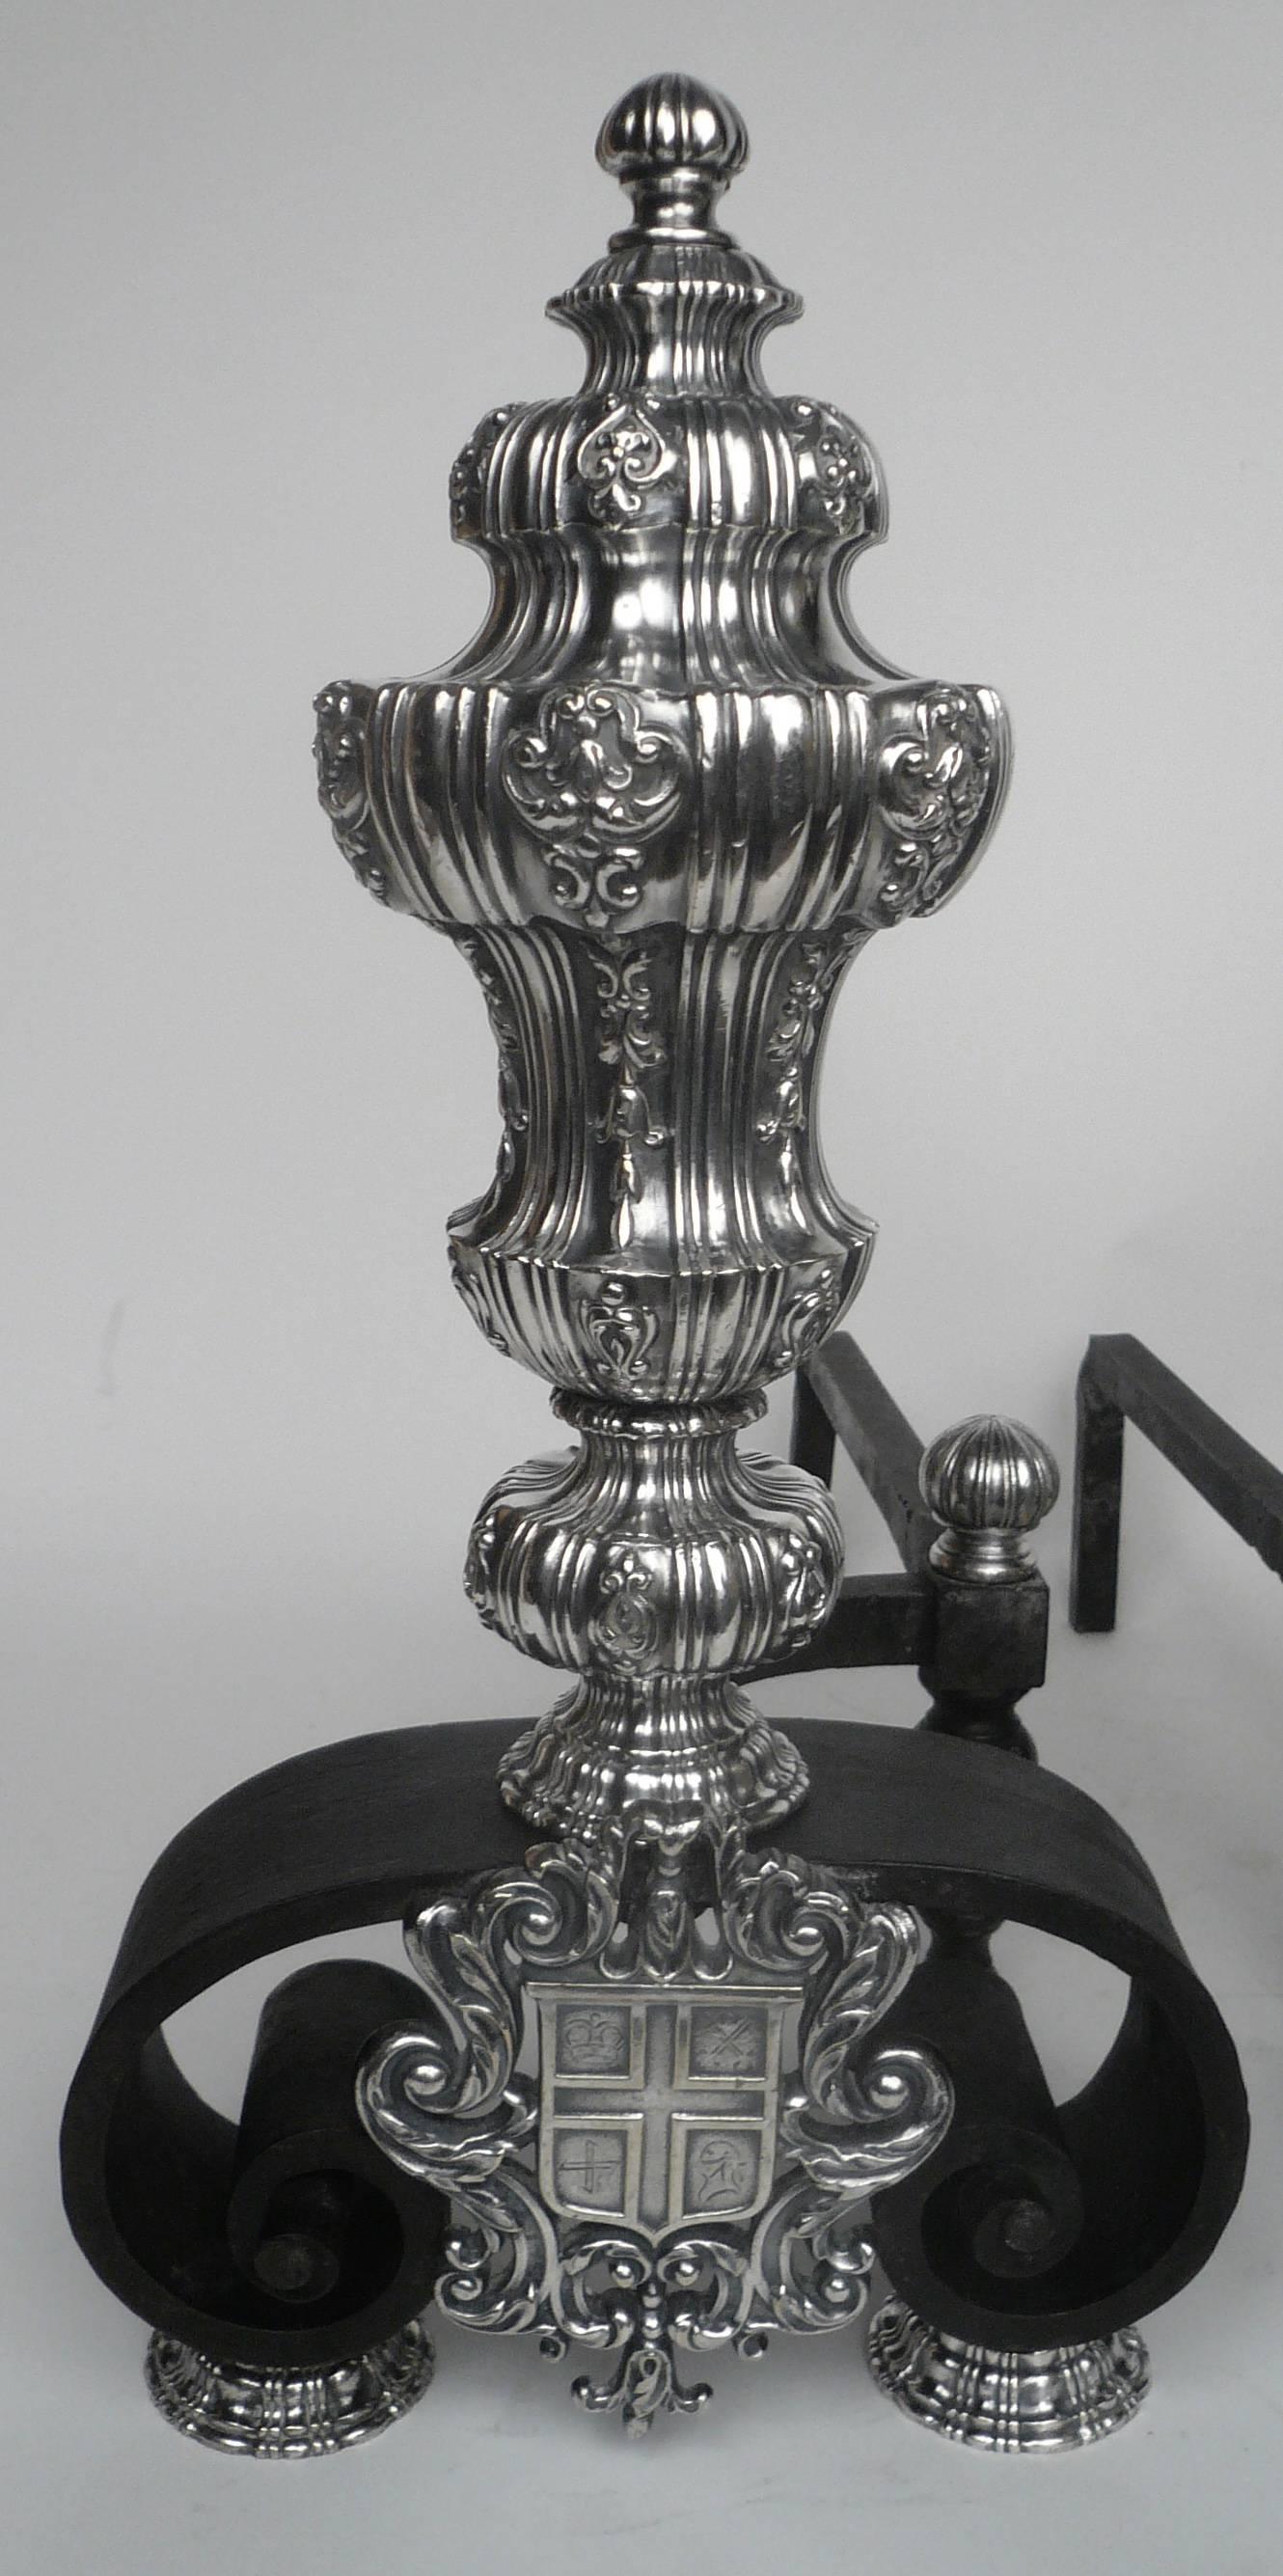 This fine quality pair of andirons are beautifully cast in silver plated bronze.